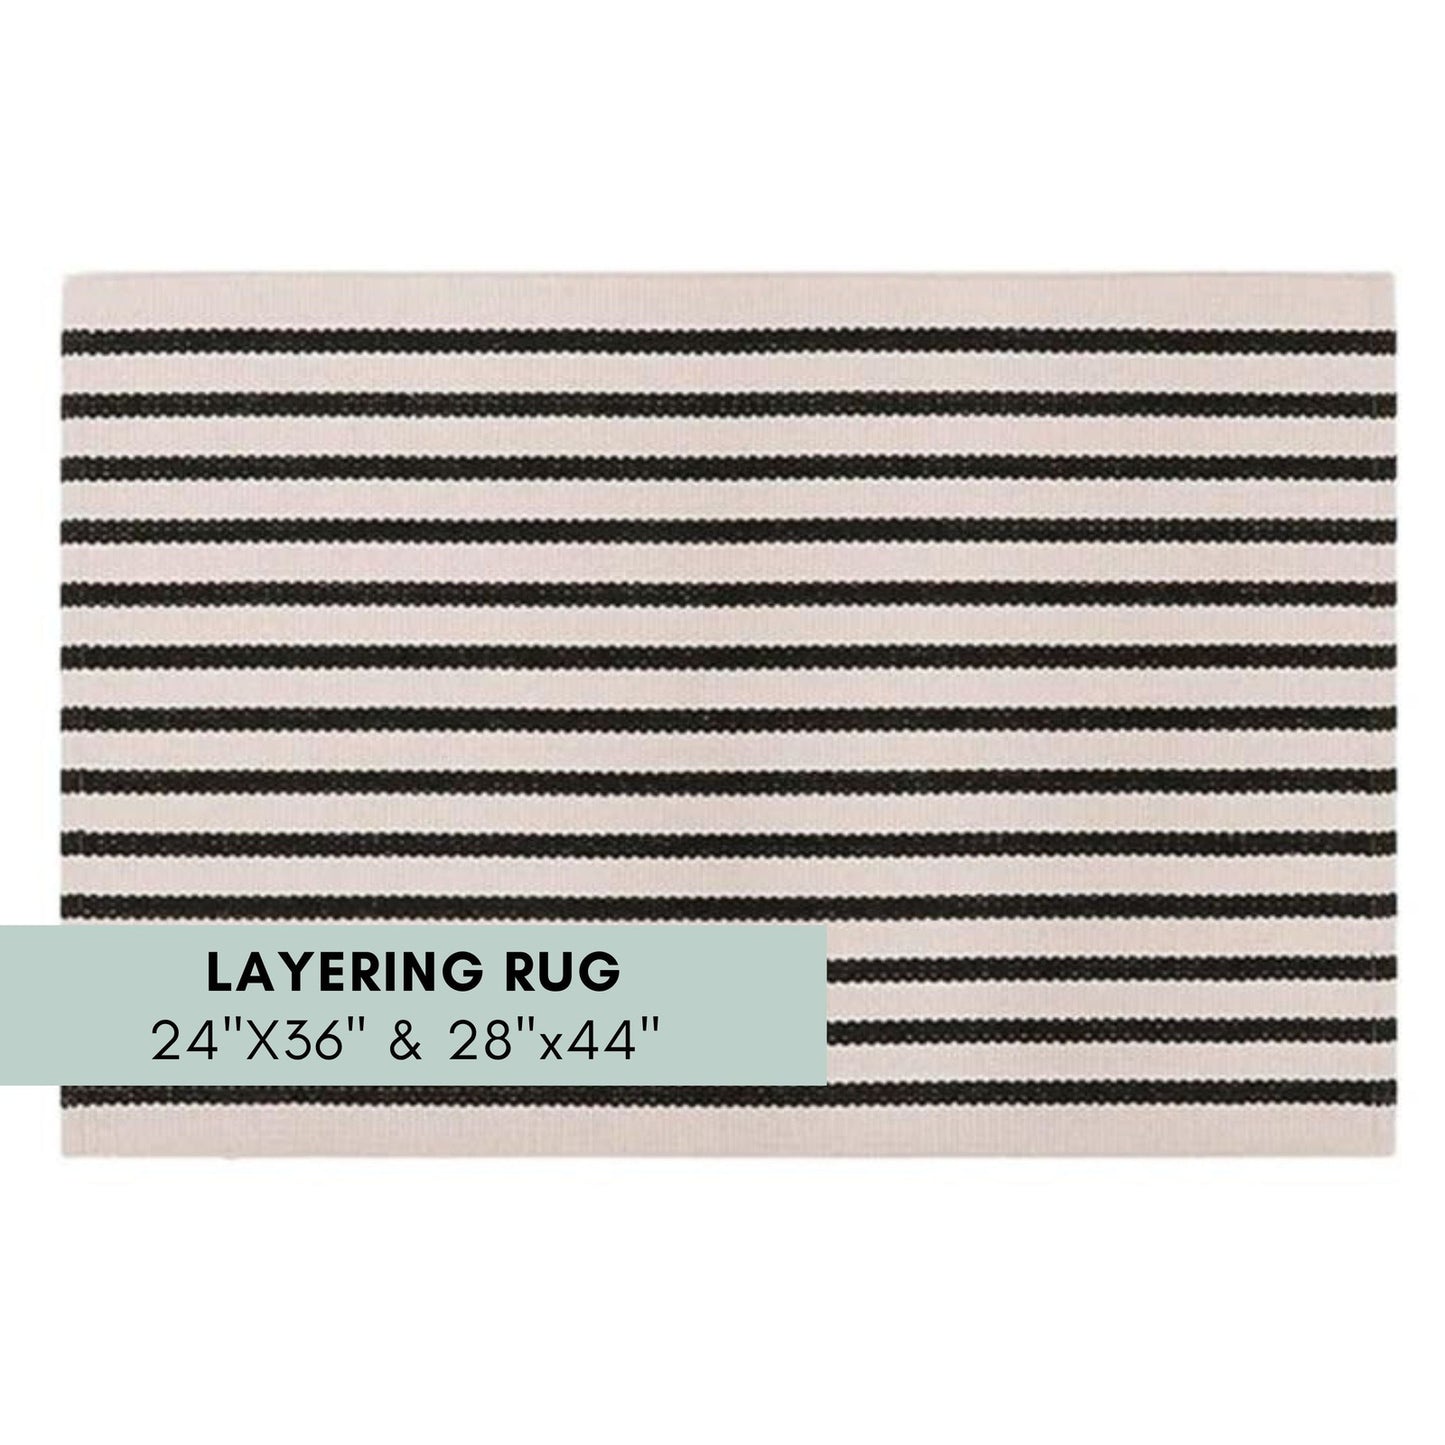 Black and White Thin Horizontal Stripe Layering Rug for Doormat